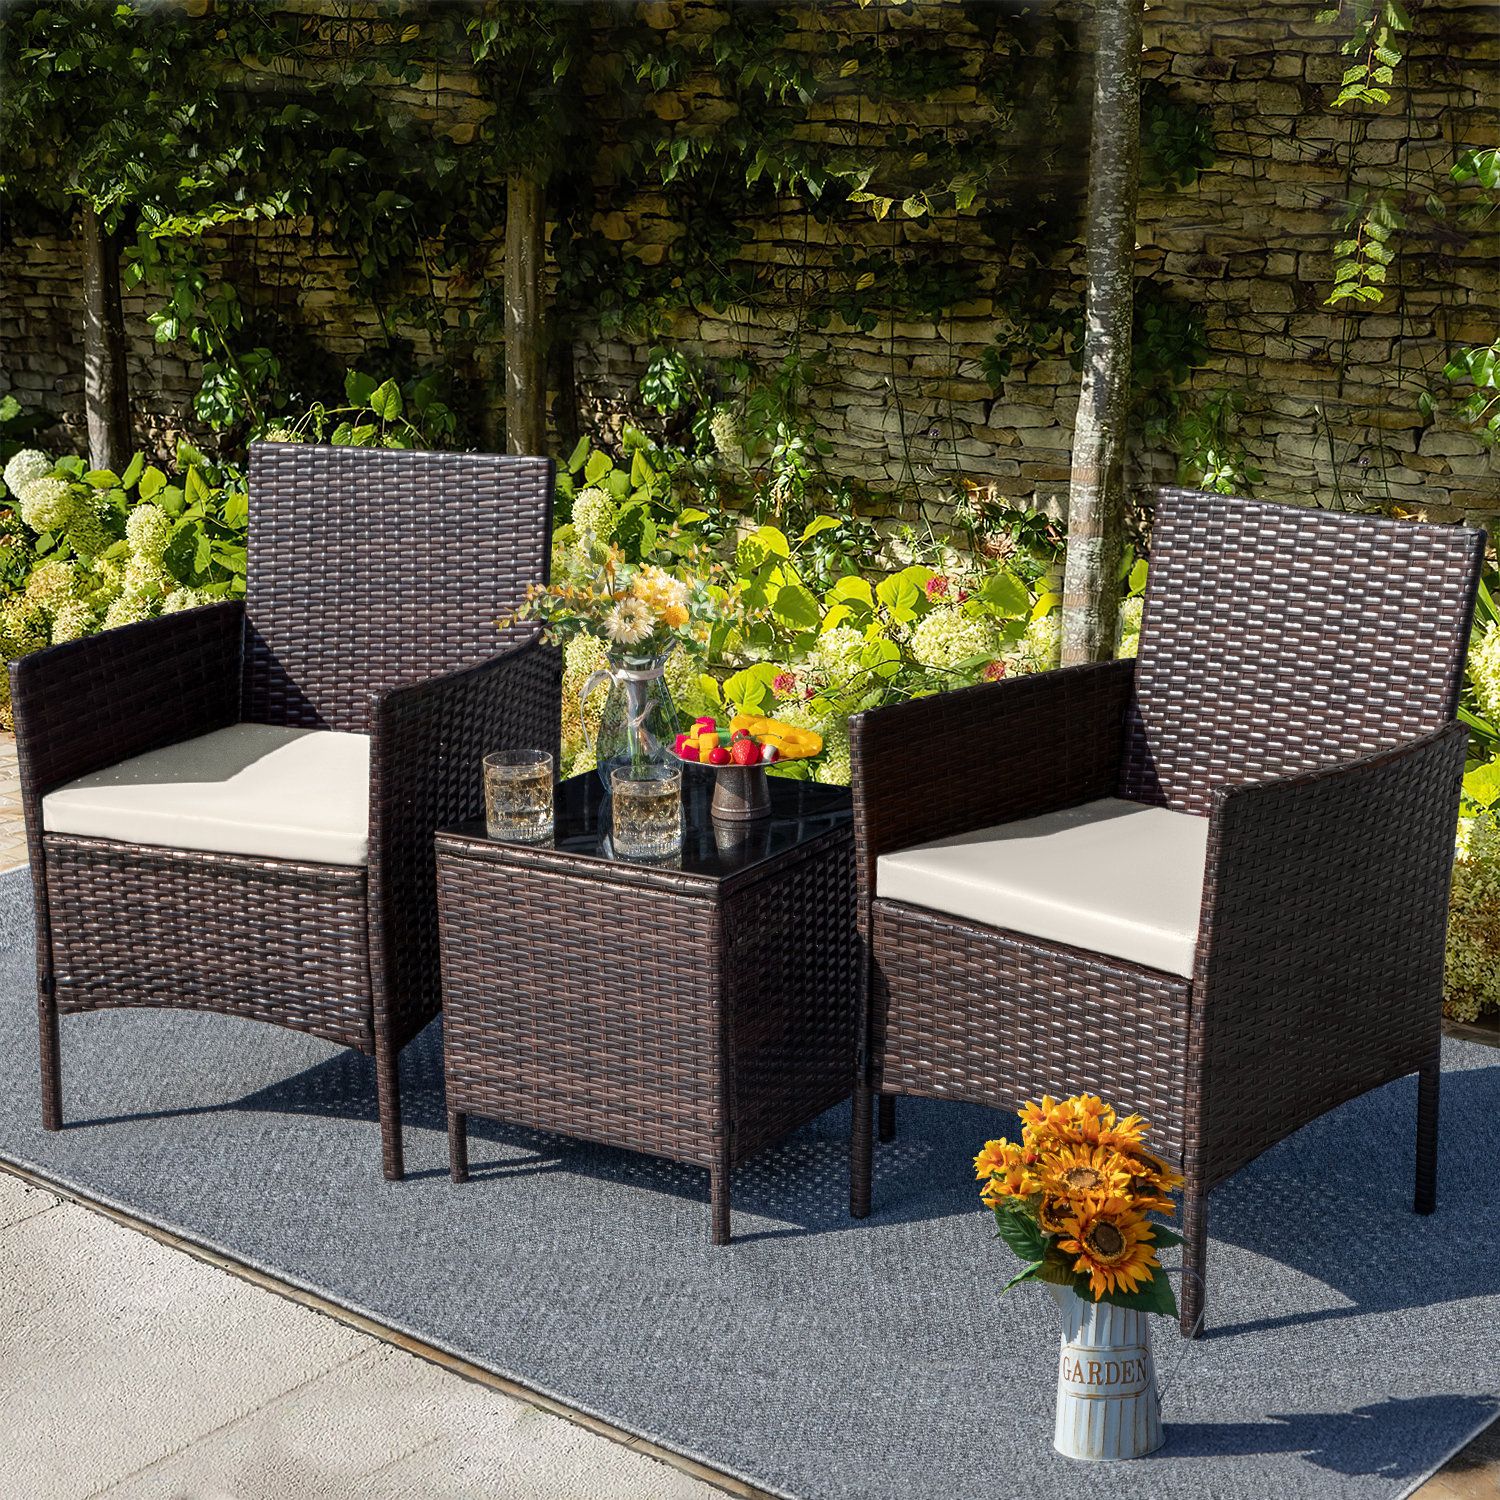 Brayden Studio® Jagger 2 – Person Outdoor Seating Group With Cushions &  Reviews | Wayfair With Regard To Backyard Porch Garden Patio Furniture Set (View 13 of 15)